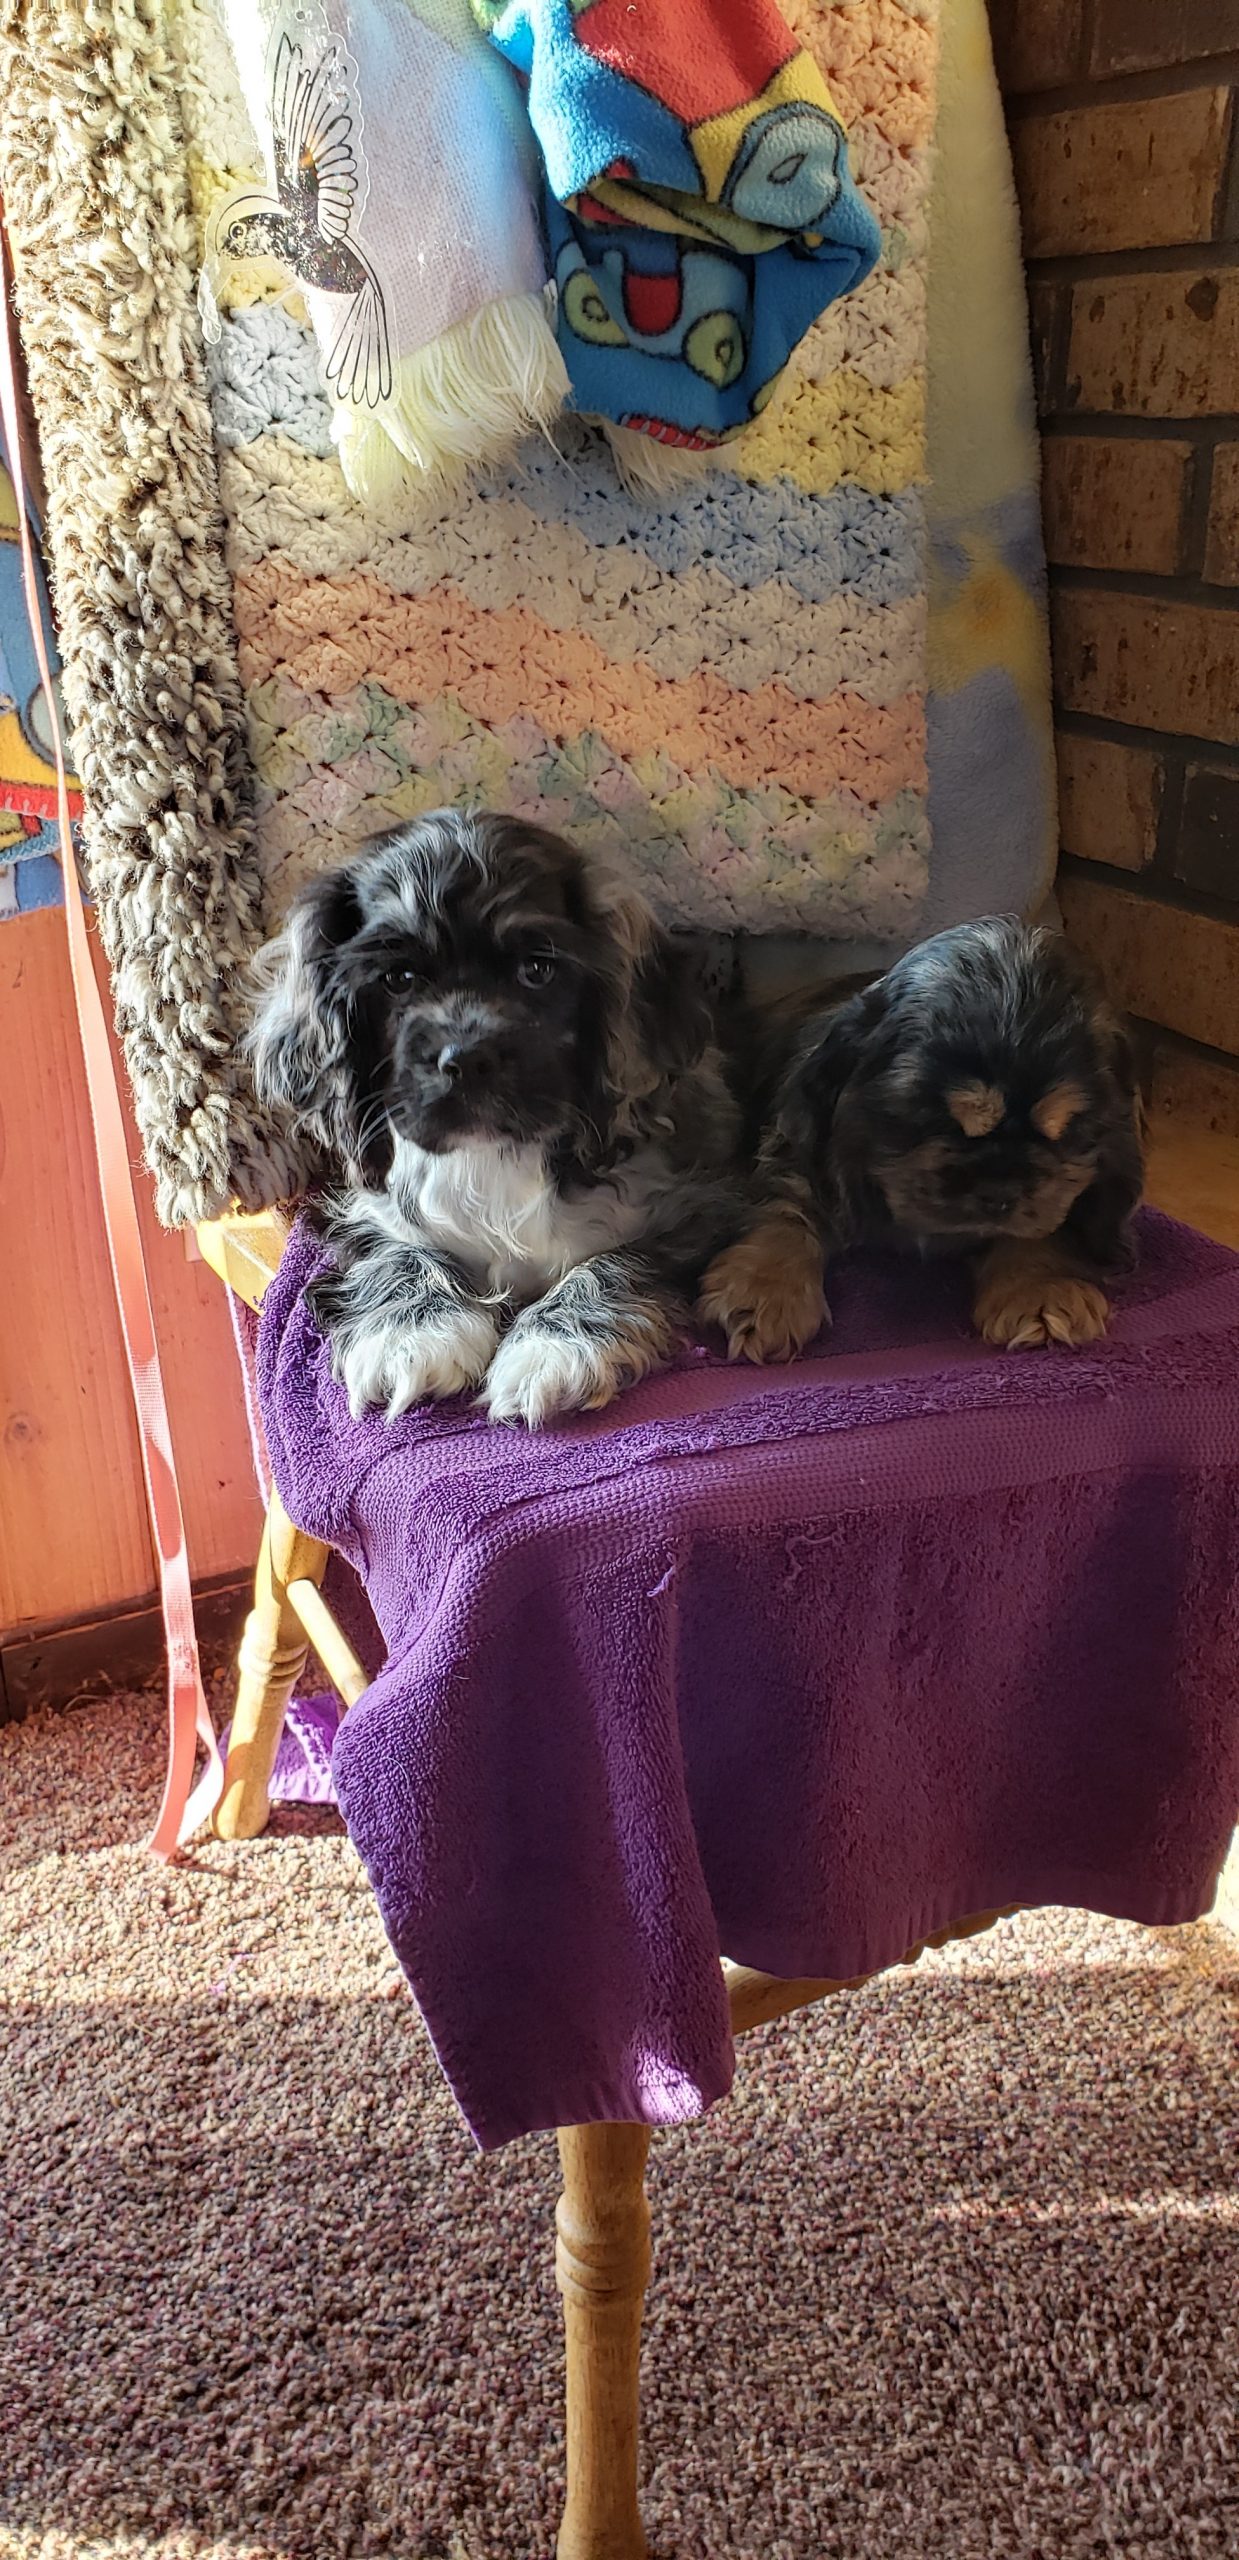 Parti Color Cocker Spaniels - Puppies For Sale at Penny ...